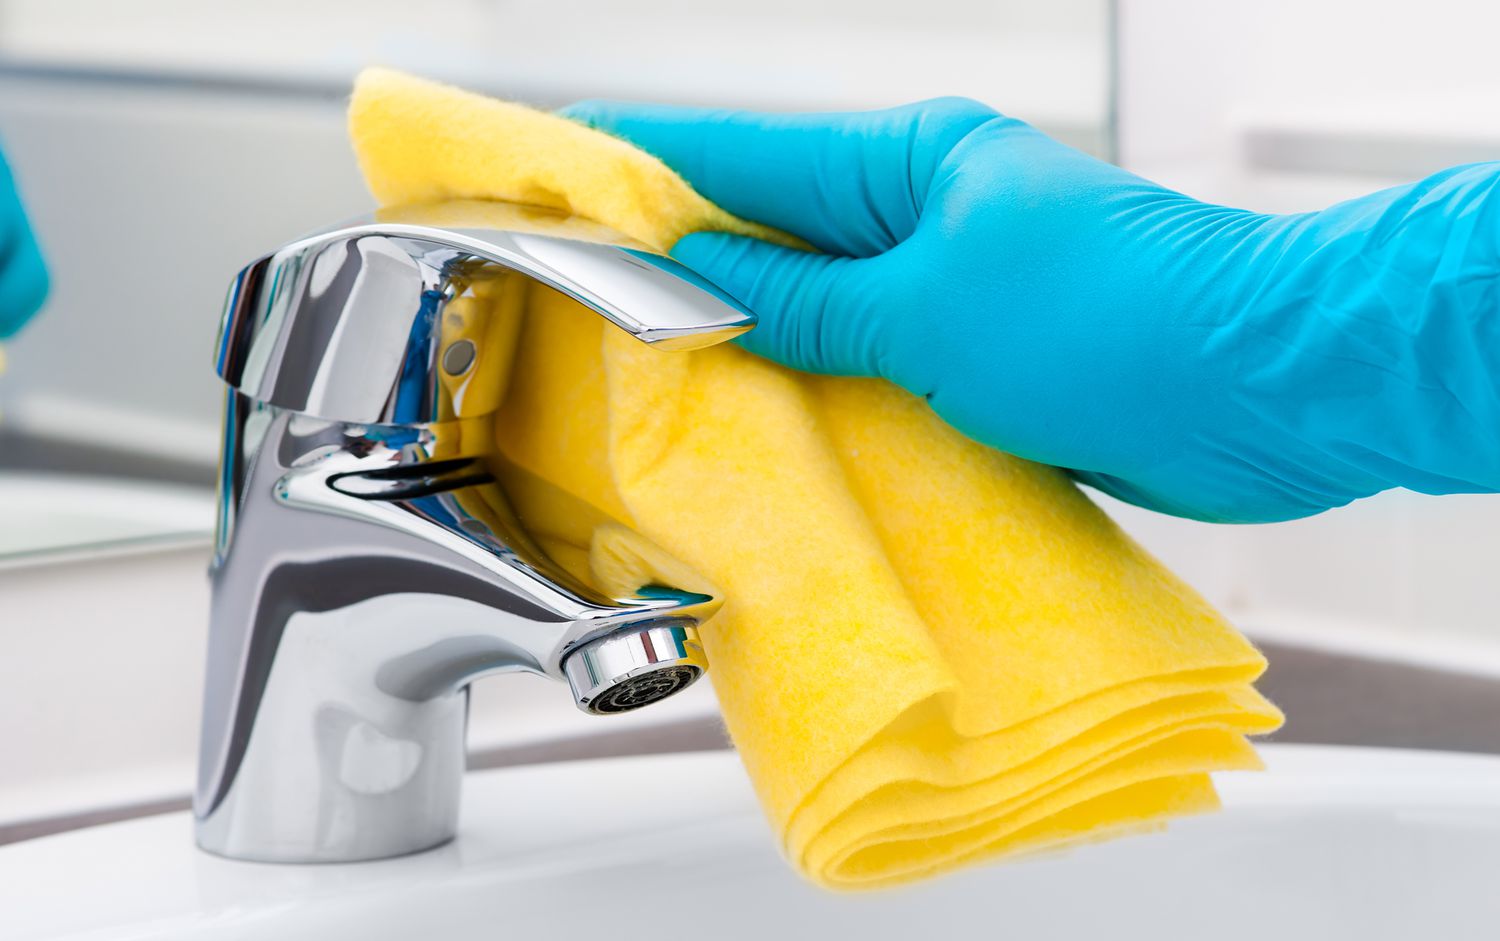 Person cleaning sink with gloves on and a cloth